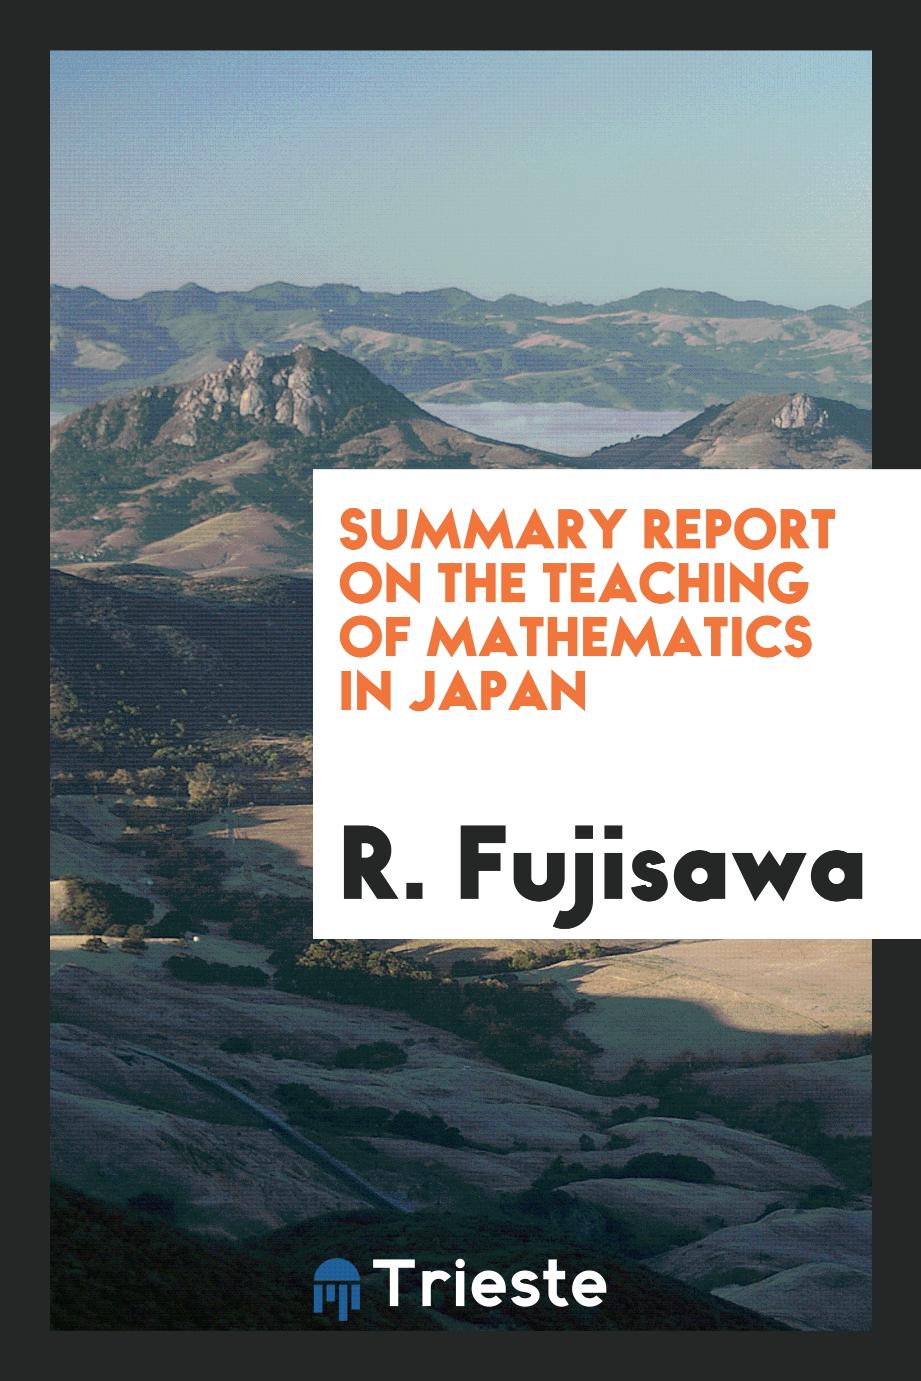 Summary report on the teaching of mathematics in Japan